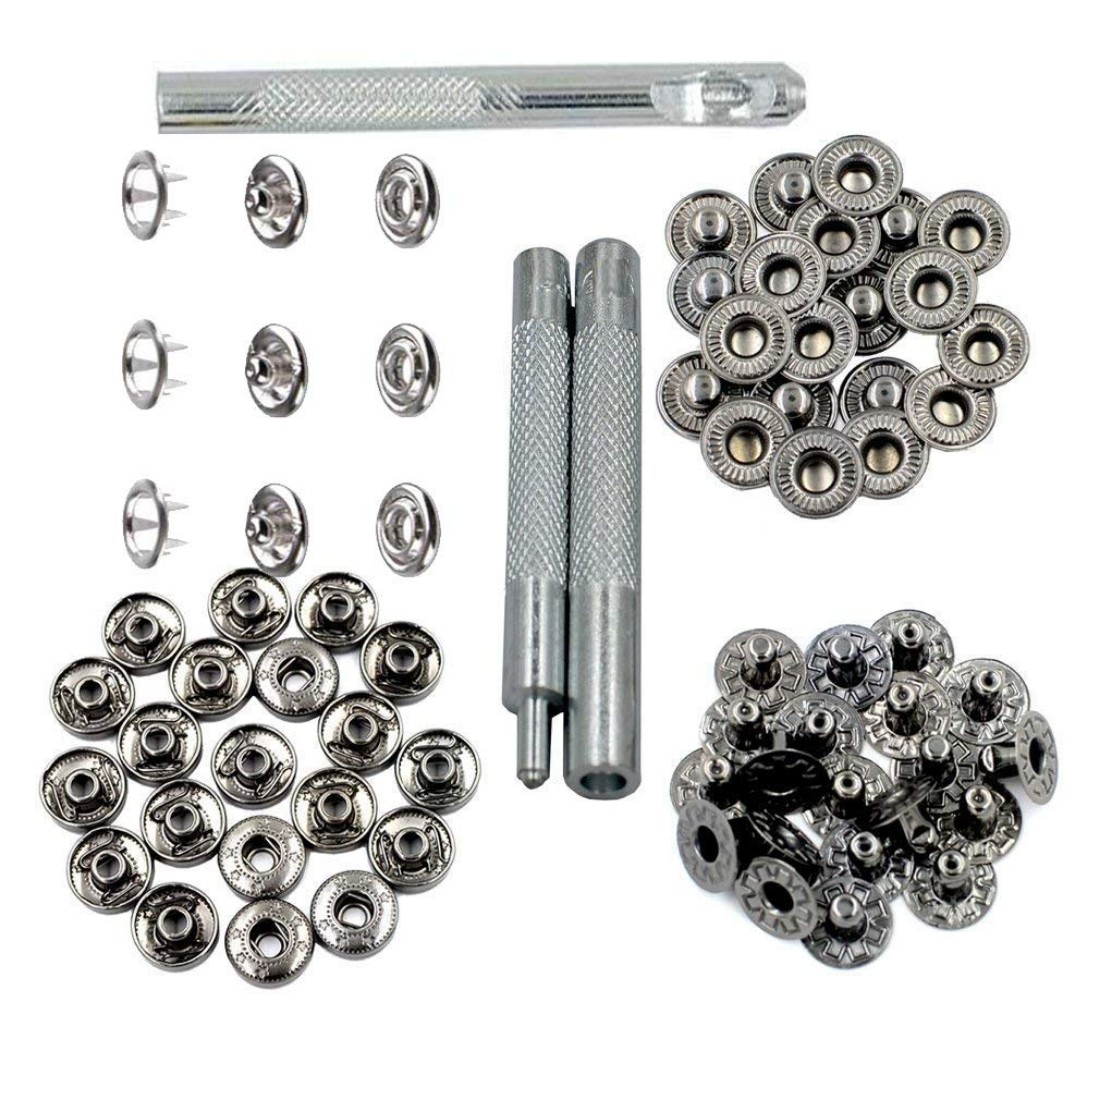 Buy DIY Crafts 500 Sets Silver Press Fasteners Studs Copper Clothes ...